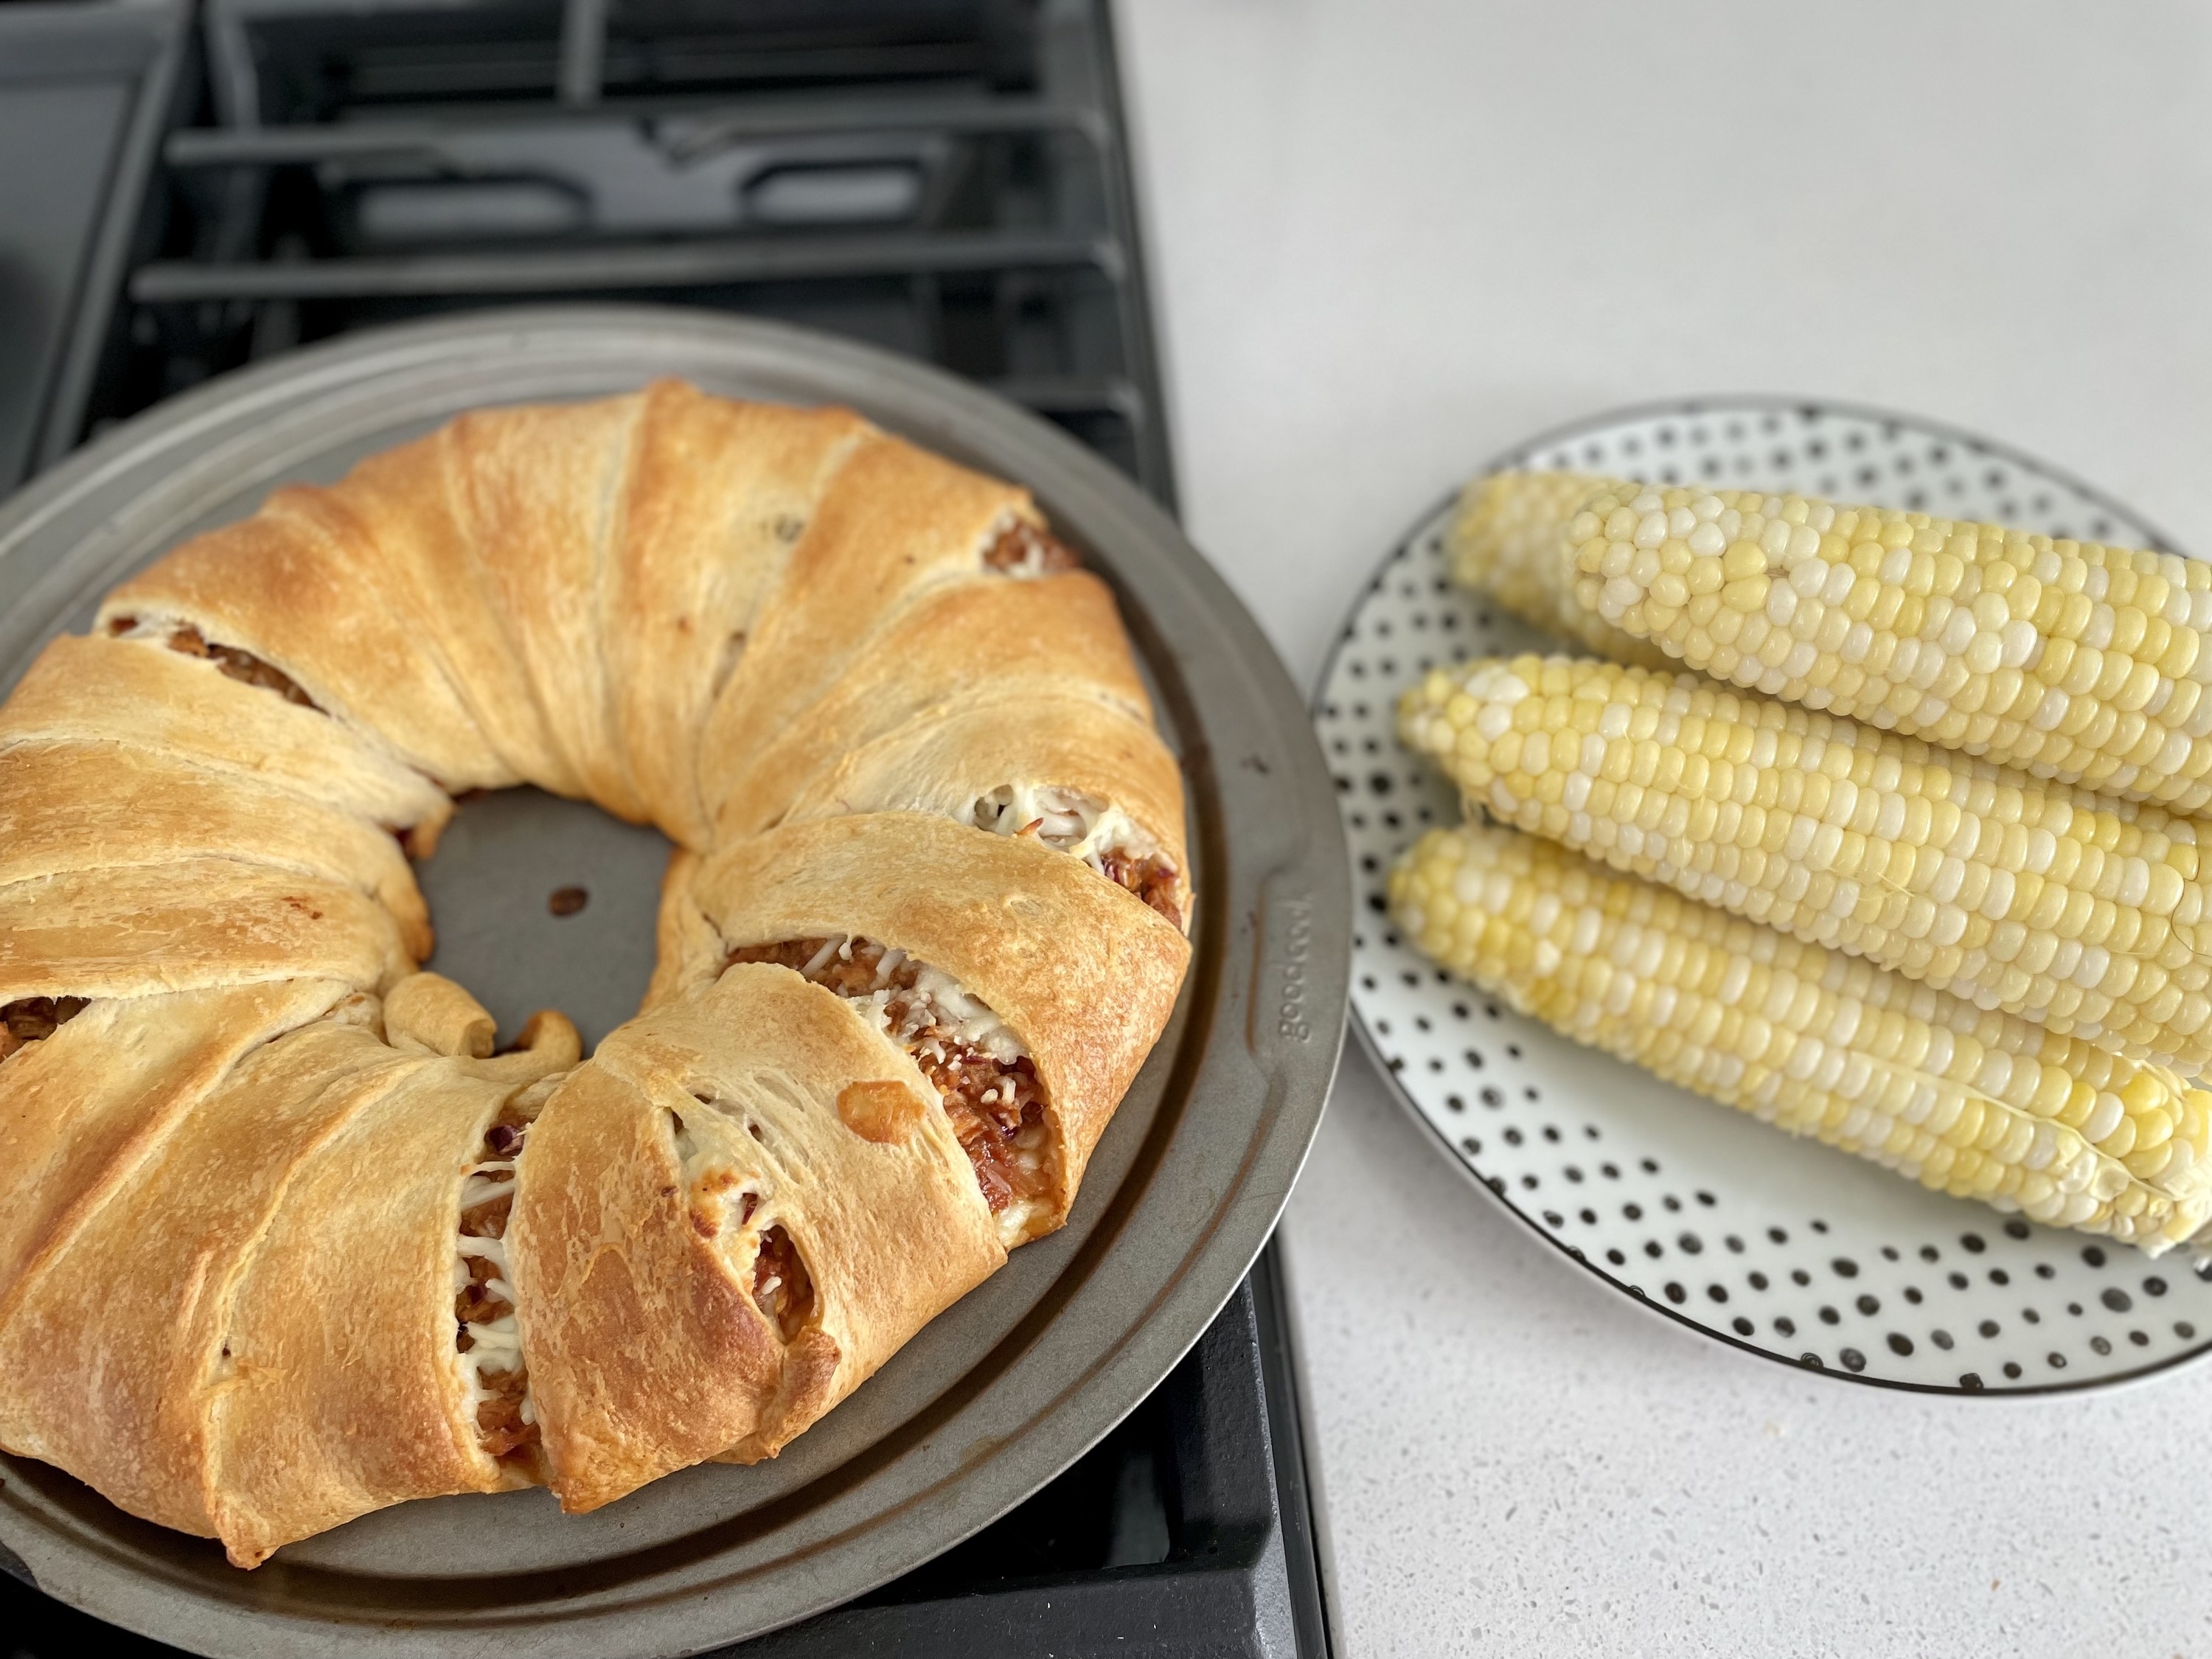 Plated BBQ chicken ring and corn